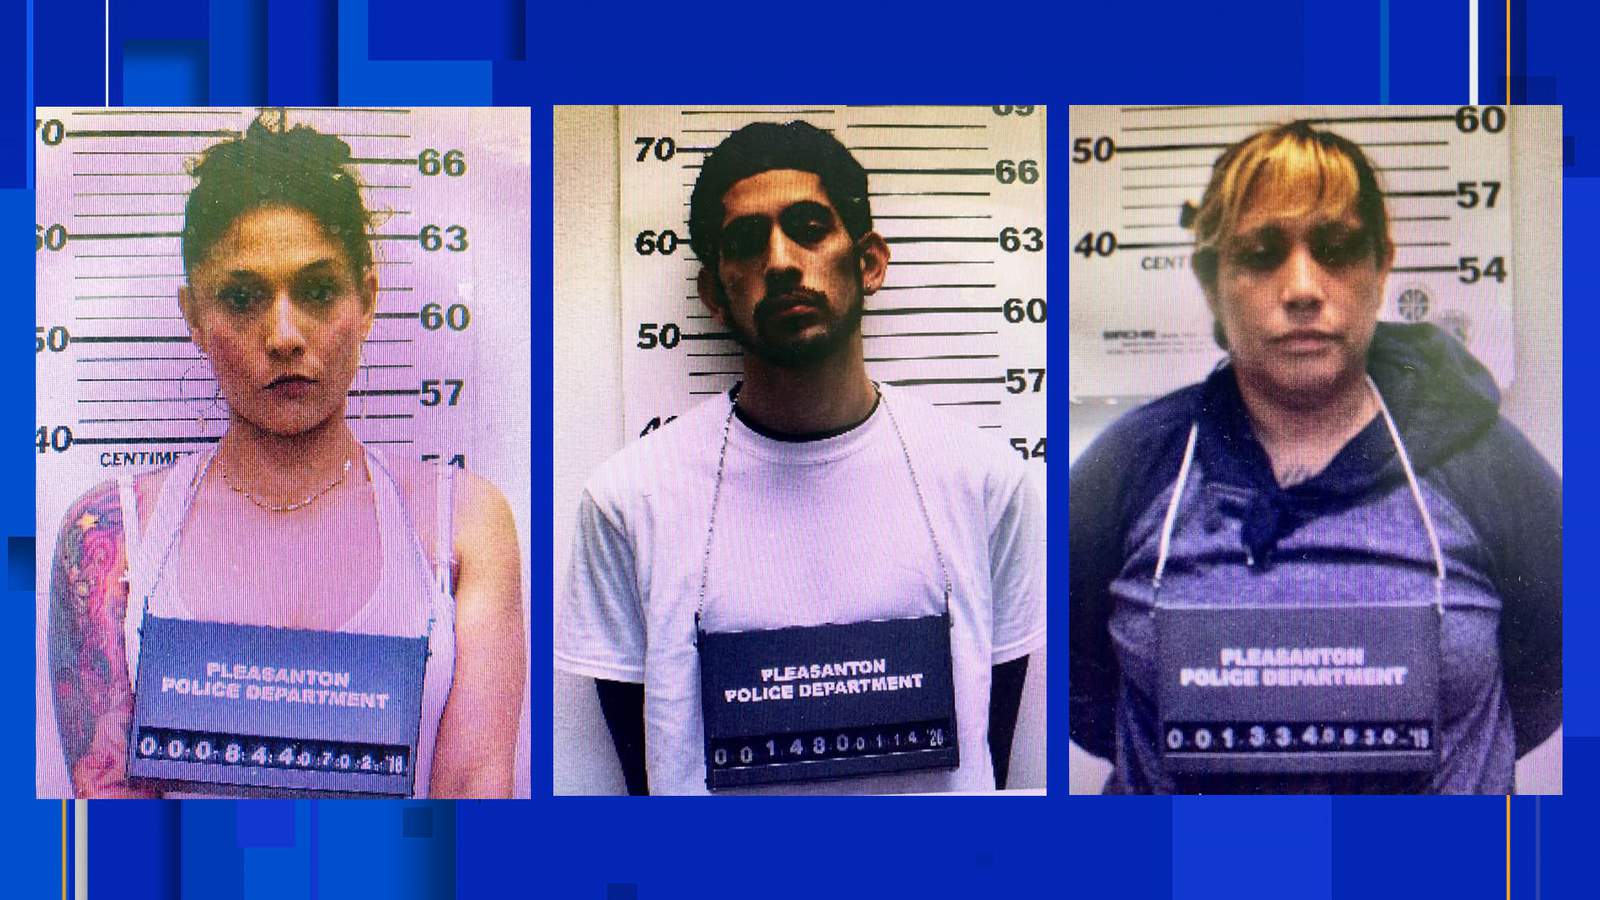 Police: Trio threw out AR-15 during pursuit, arrested on 16 charges